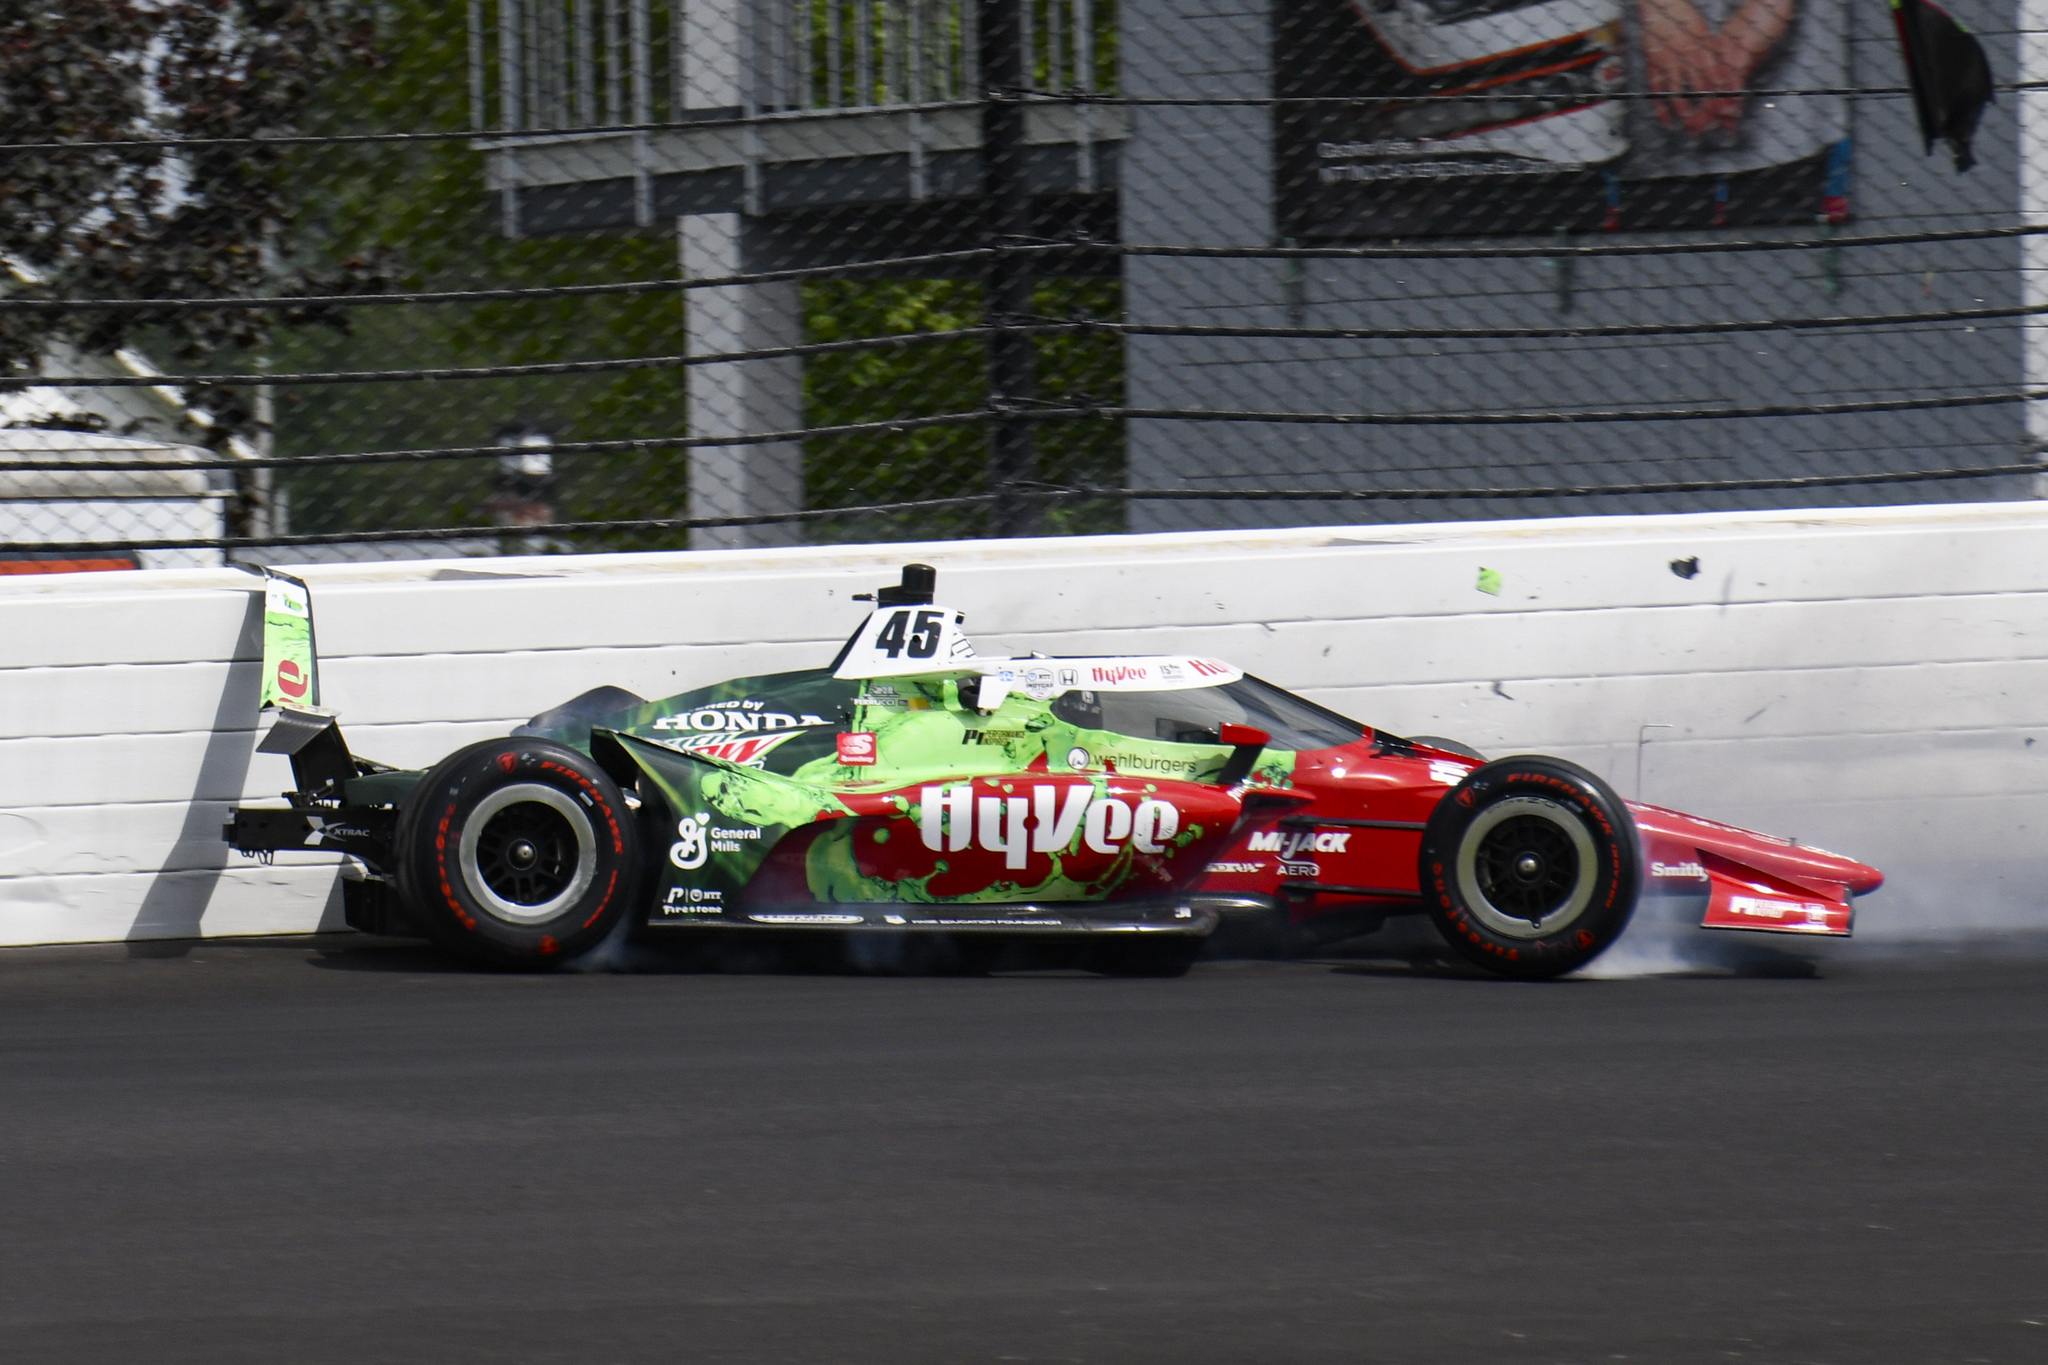 Santino Ferrucci hits the wall in the second turn during practice for the Indianapolis 500 auto race at Indianapolis Motor Speedway in Indianapolis, Thursday, May 20, 2021. (AP Photo/Jamie Gallagher)